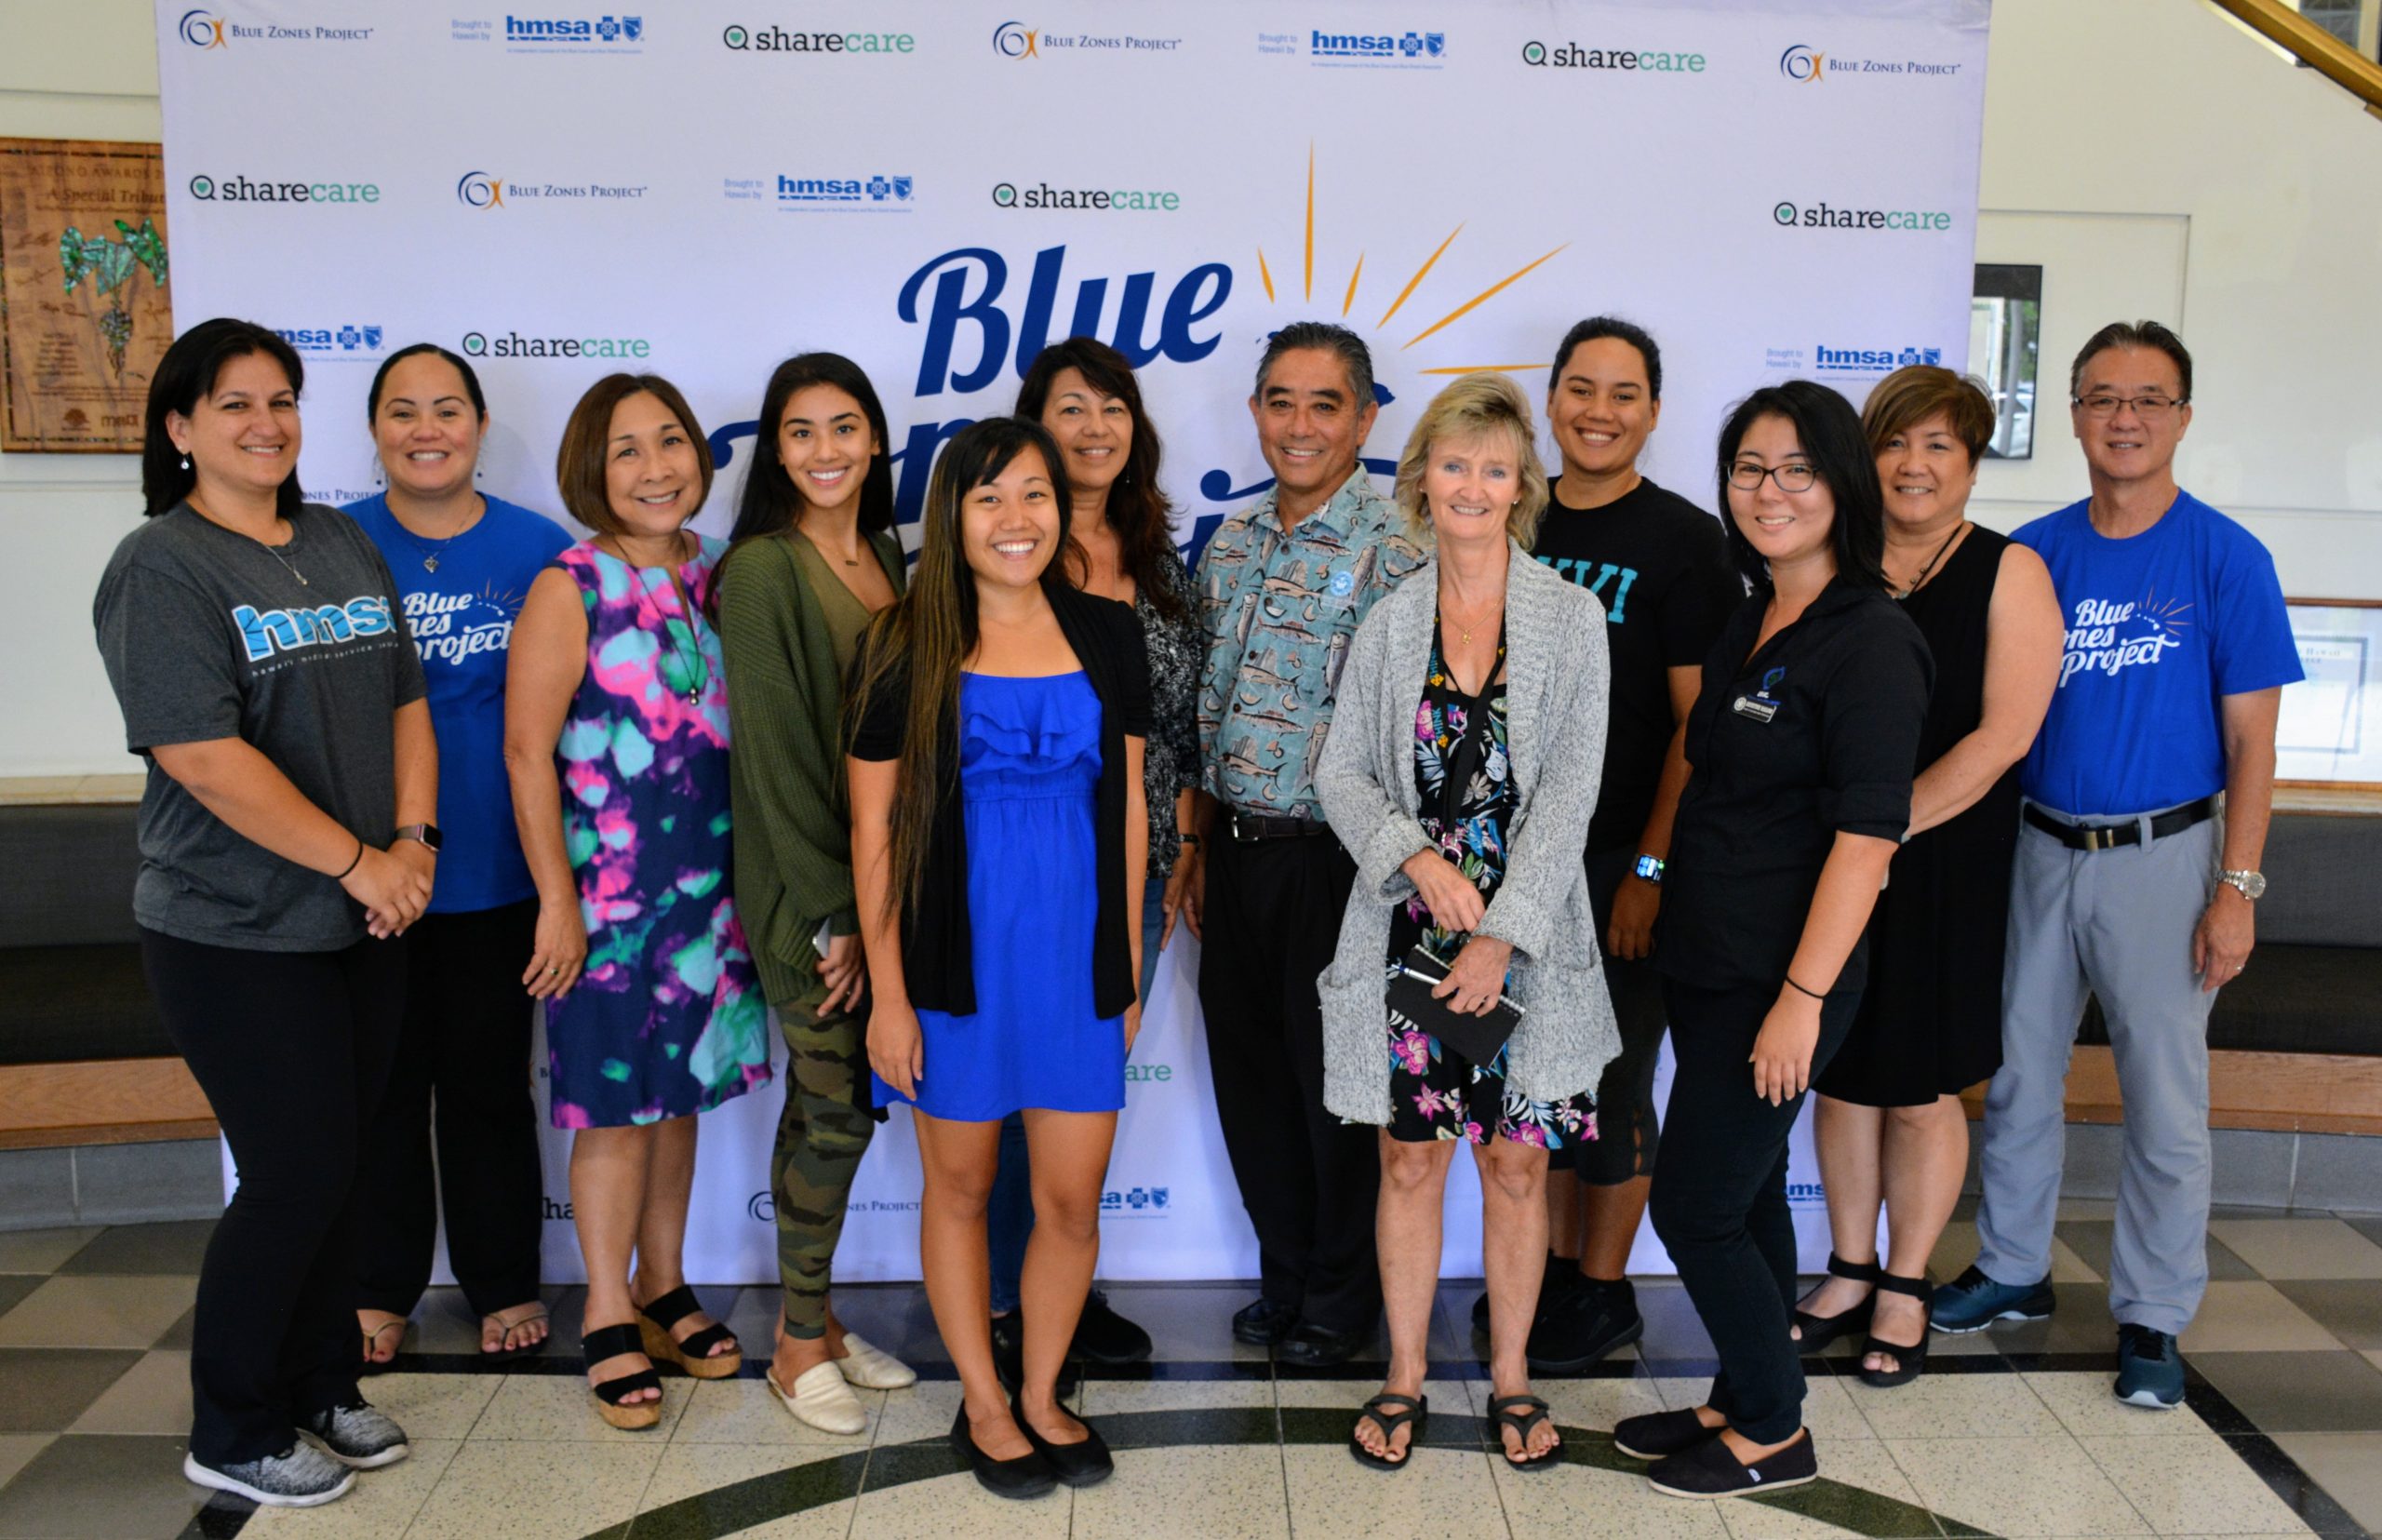 Maui College's supporters of the Blue Zones project and participants with the Wellness Hui